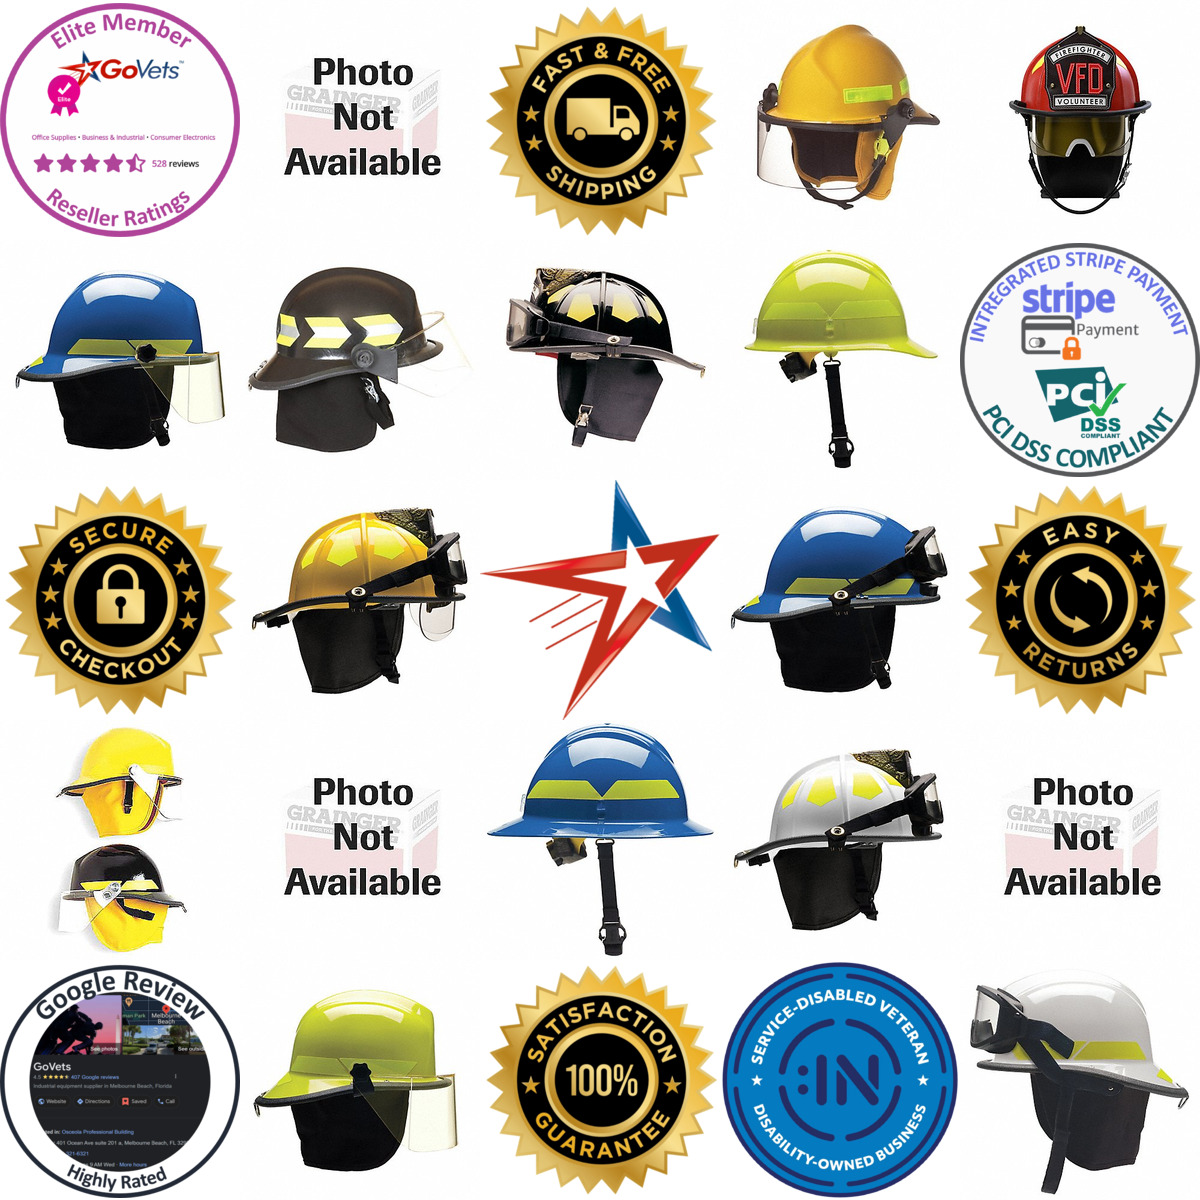 A selection of Fire and Rescue Helmets products on GoVets